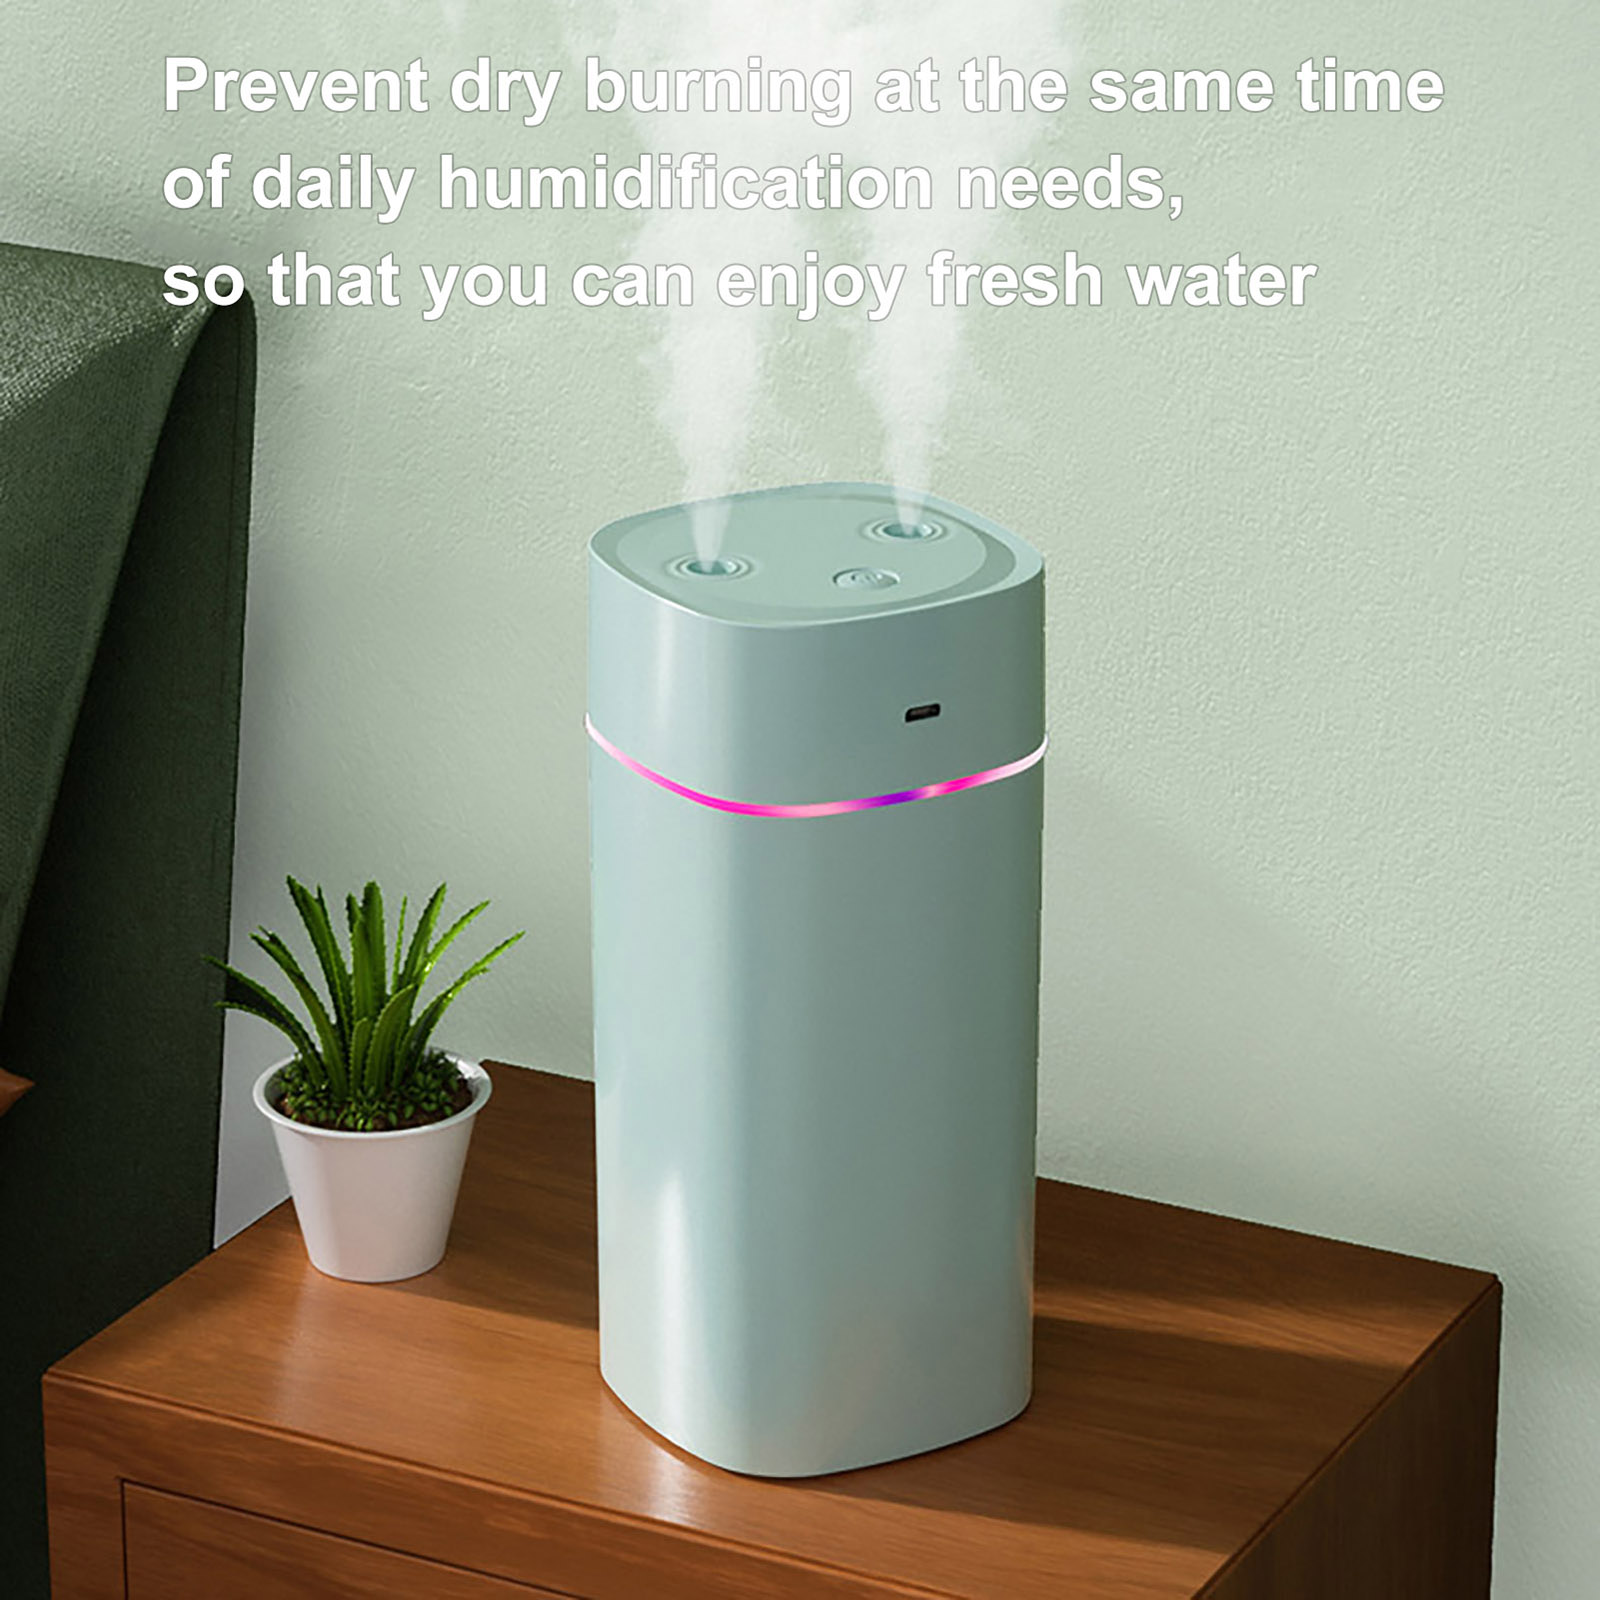 Portable Mini Humidifier, Small Humidifier With Sunset Light, Desktop  Humidifier With 2 Spray Modes And Auto Shut Off, Humidifier For Office,  Bedroom, Baby Bedroom, Home From Juulpod, $19.7